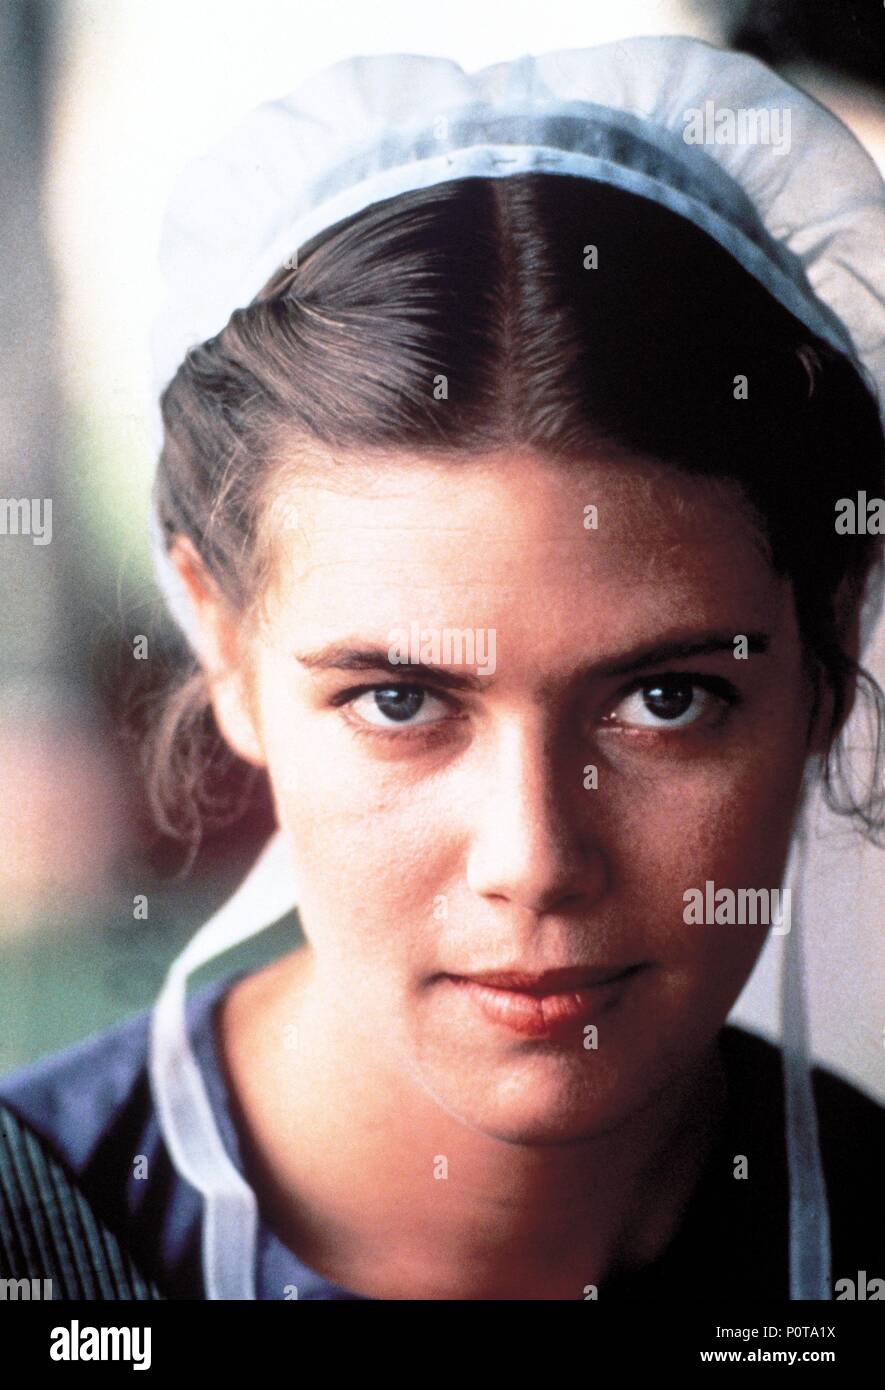 Original Film Title: WITNESS.  English Title: WITNESS.  Film Director: PETER WEIR.  Year: 1985.  Stars: KELLY MCGILLIS. Credit: PARAMOUNT PICTURES / Album Stock Photo